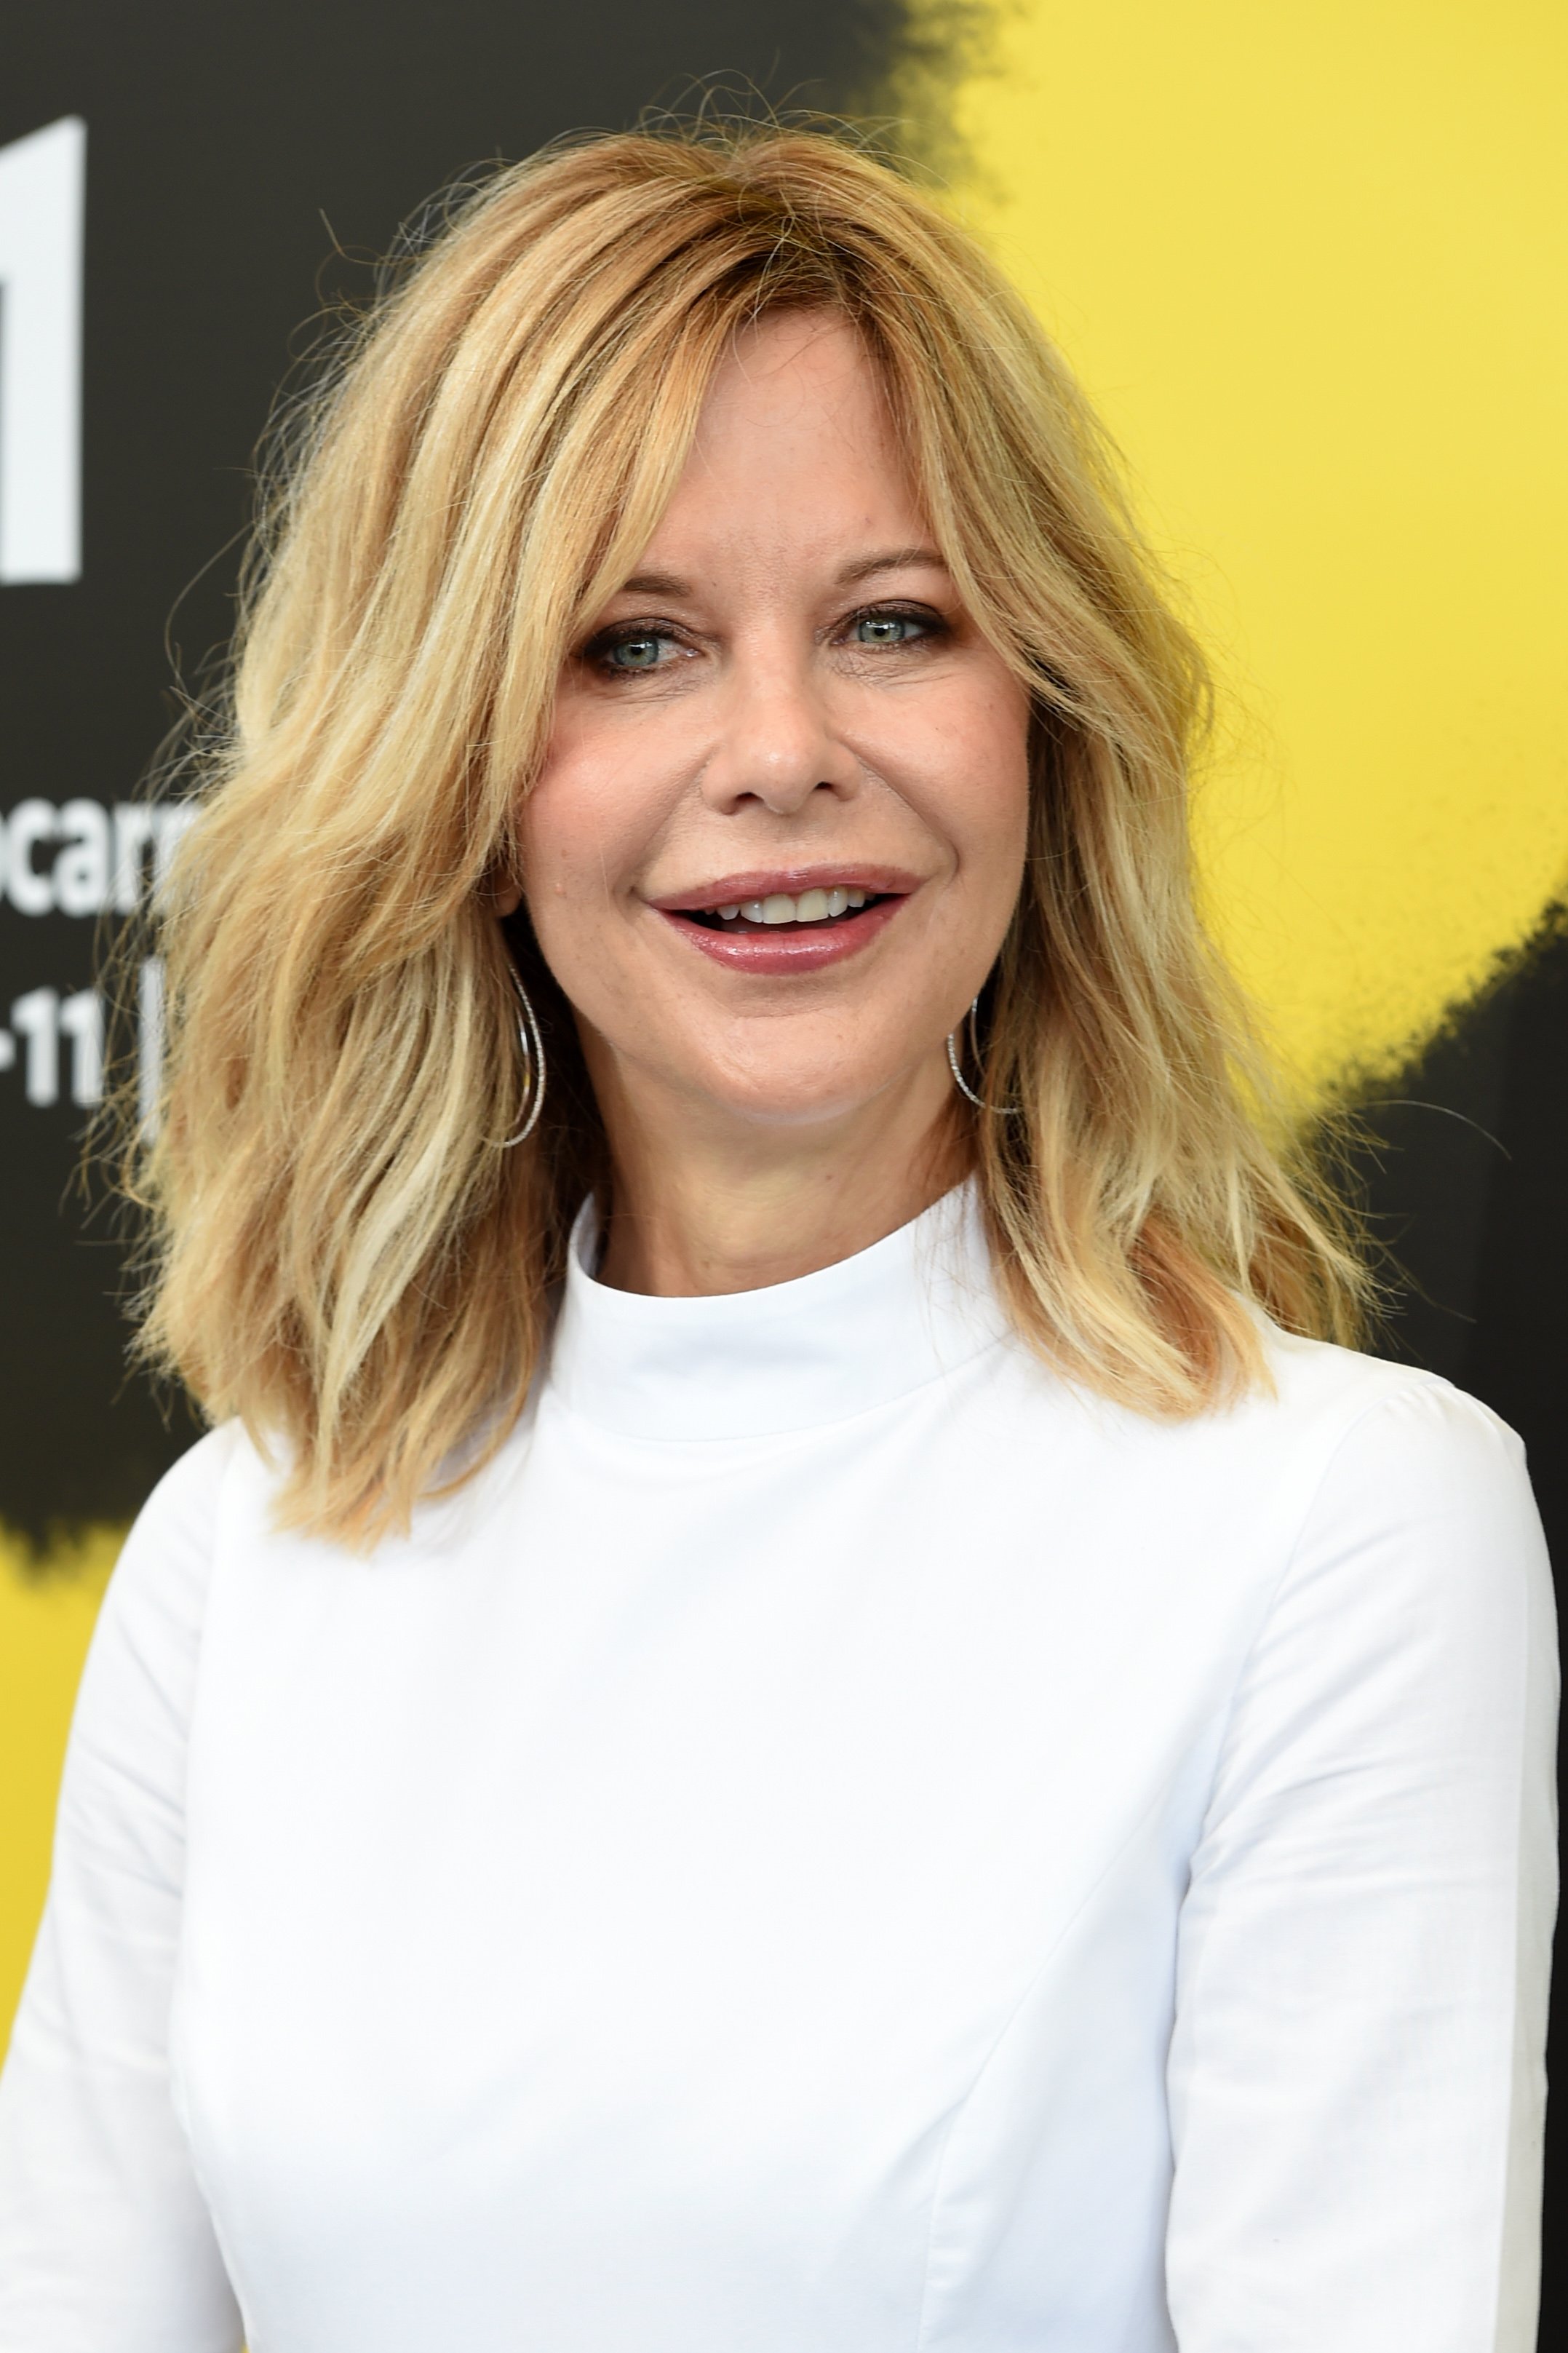 Meg Ryan attends a conversation with the public during the 71st Locarno Film Festival on August 4, 2018 in Locarno, Switzerland | Photo: Getty Images